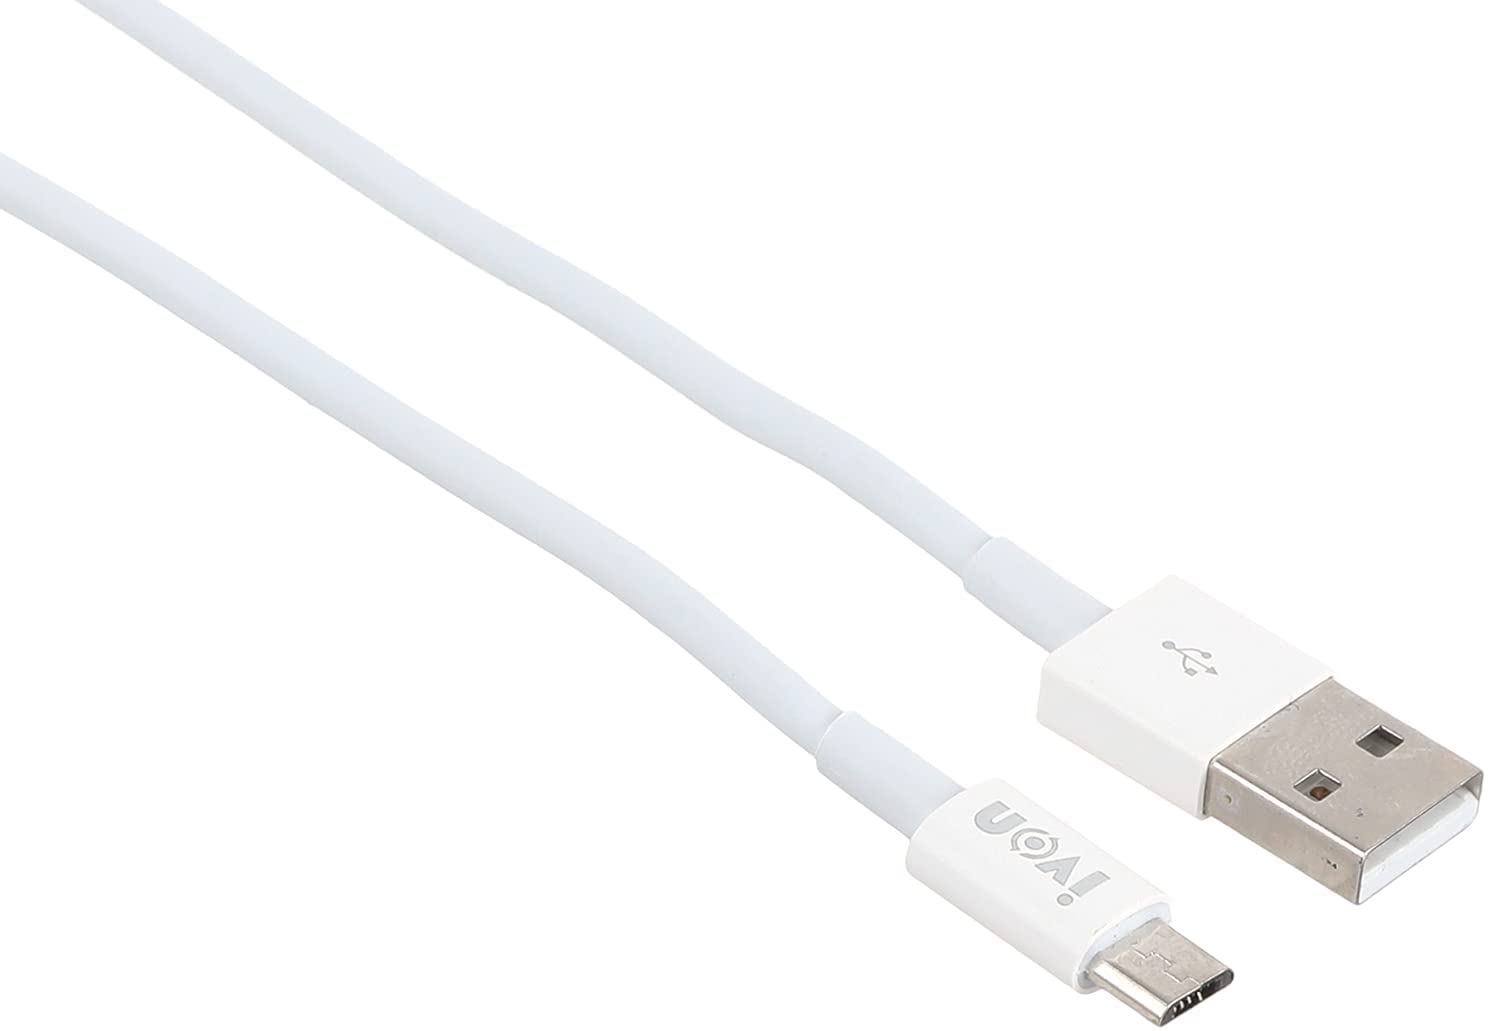 Ivon Micro USB Charging Cable, 2 Meters, White- Kx2149